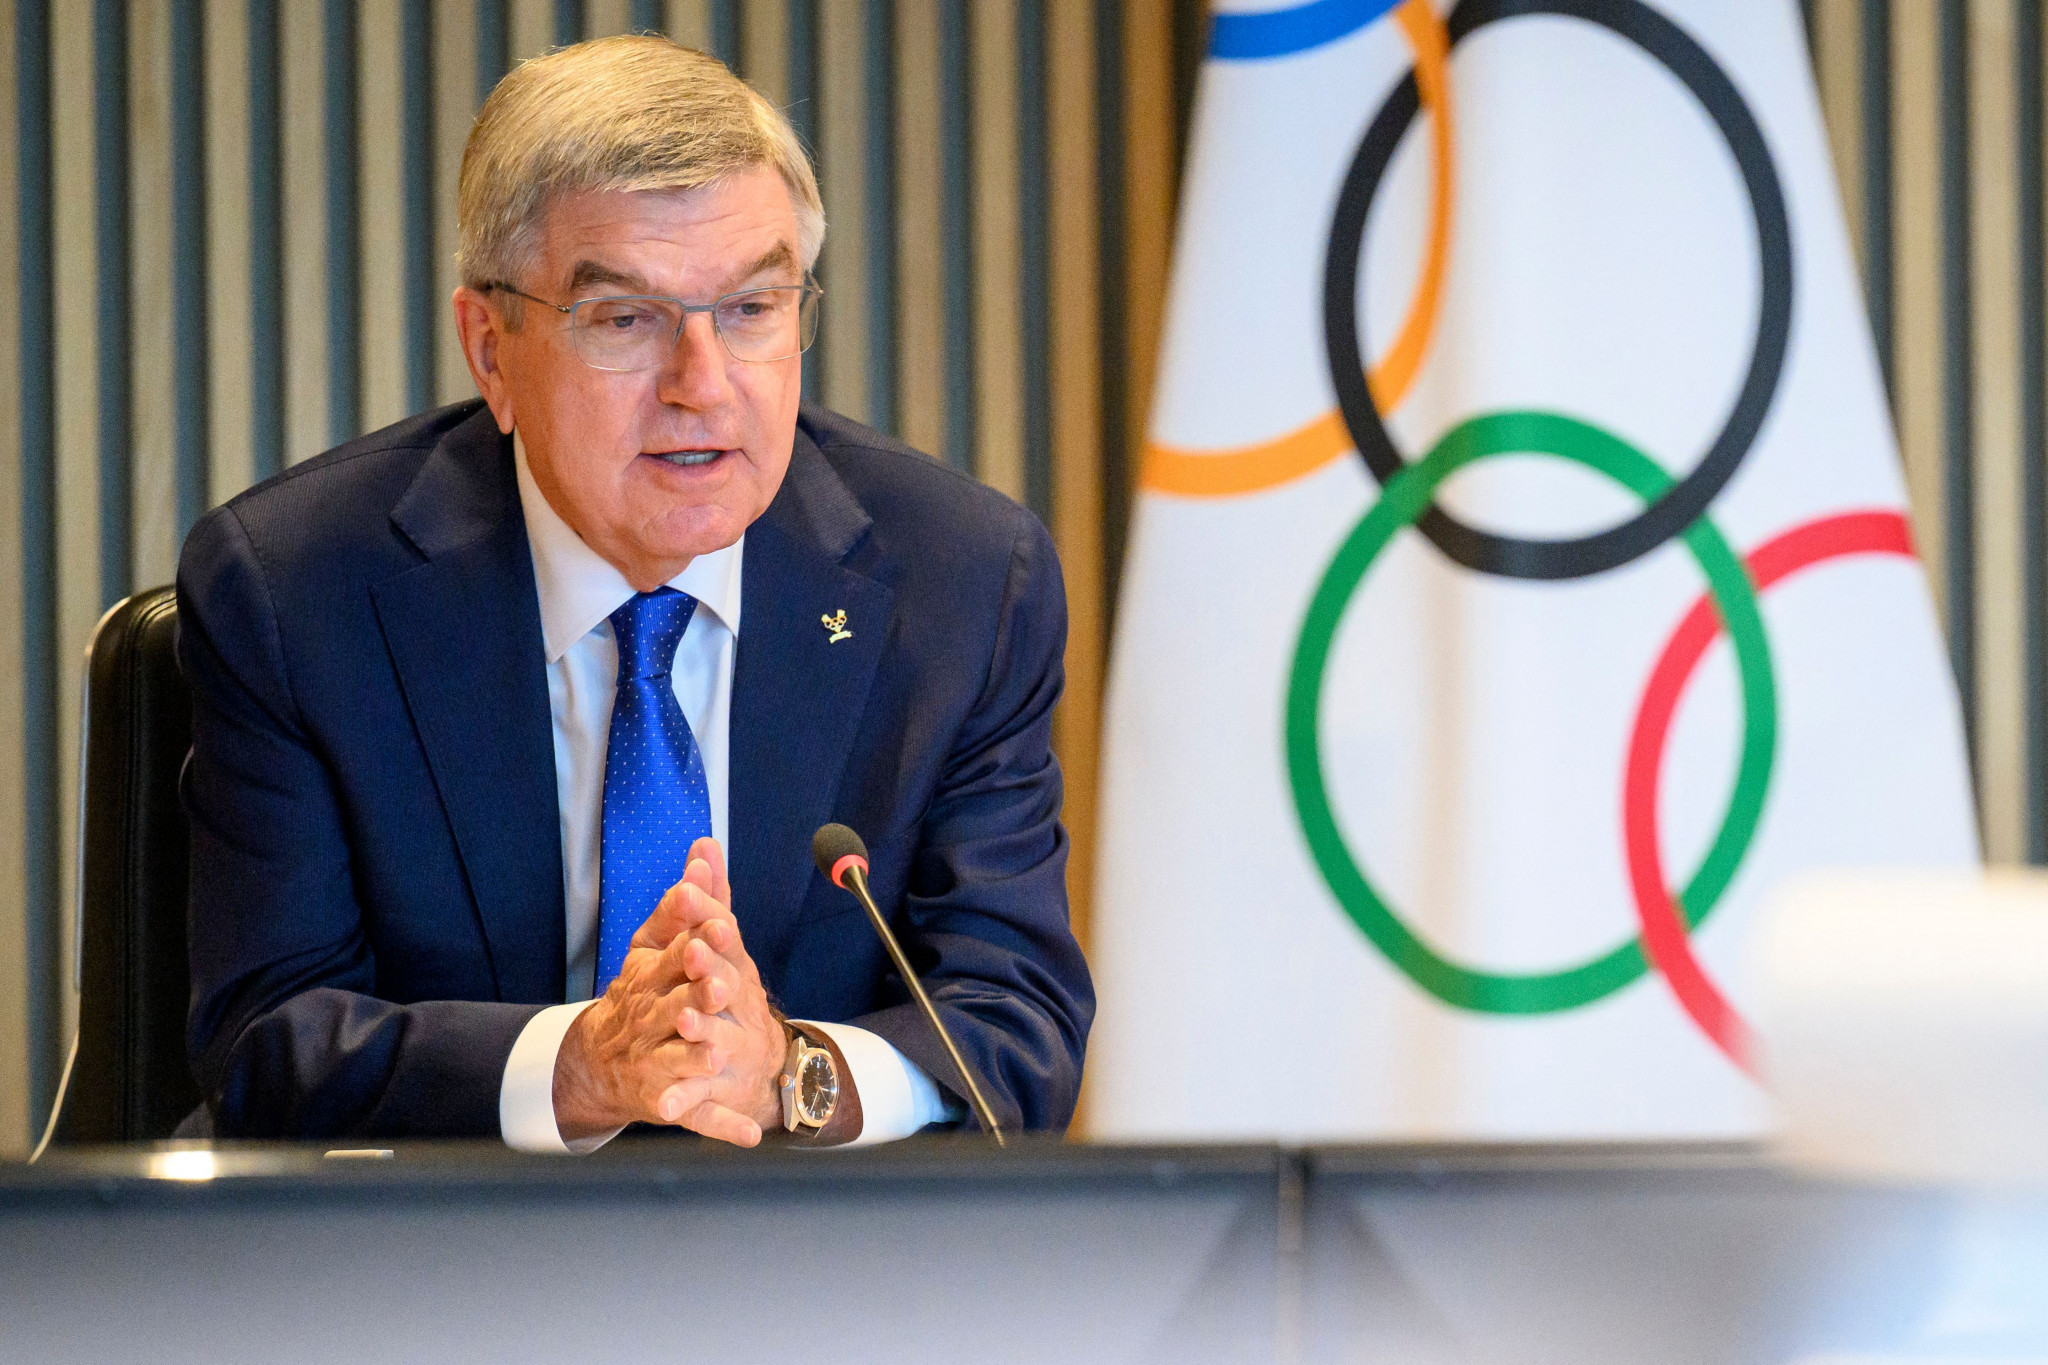 IOC President Thomas Bach has hinted that Russian athletes could be allowed to complete if they do not support the war ©IOC